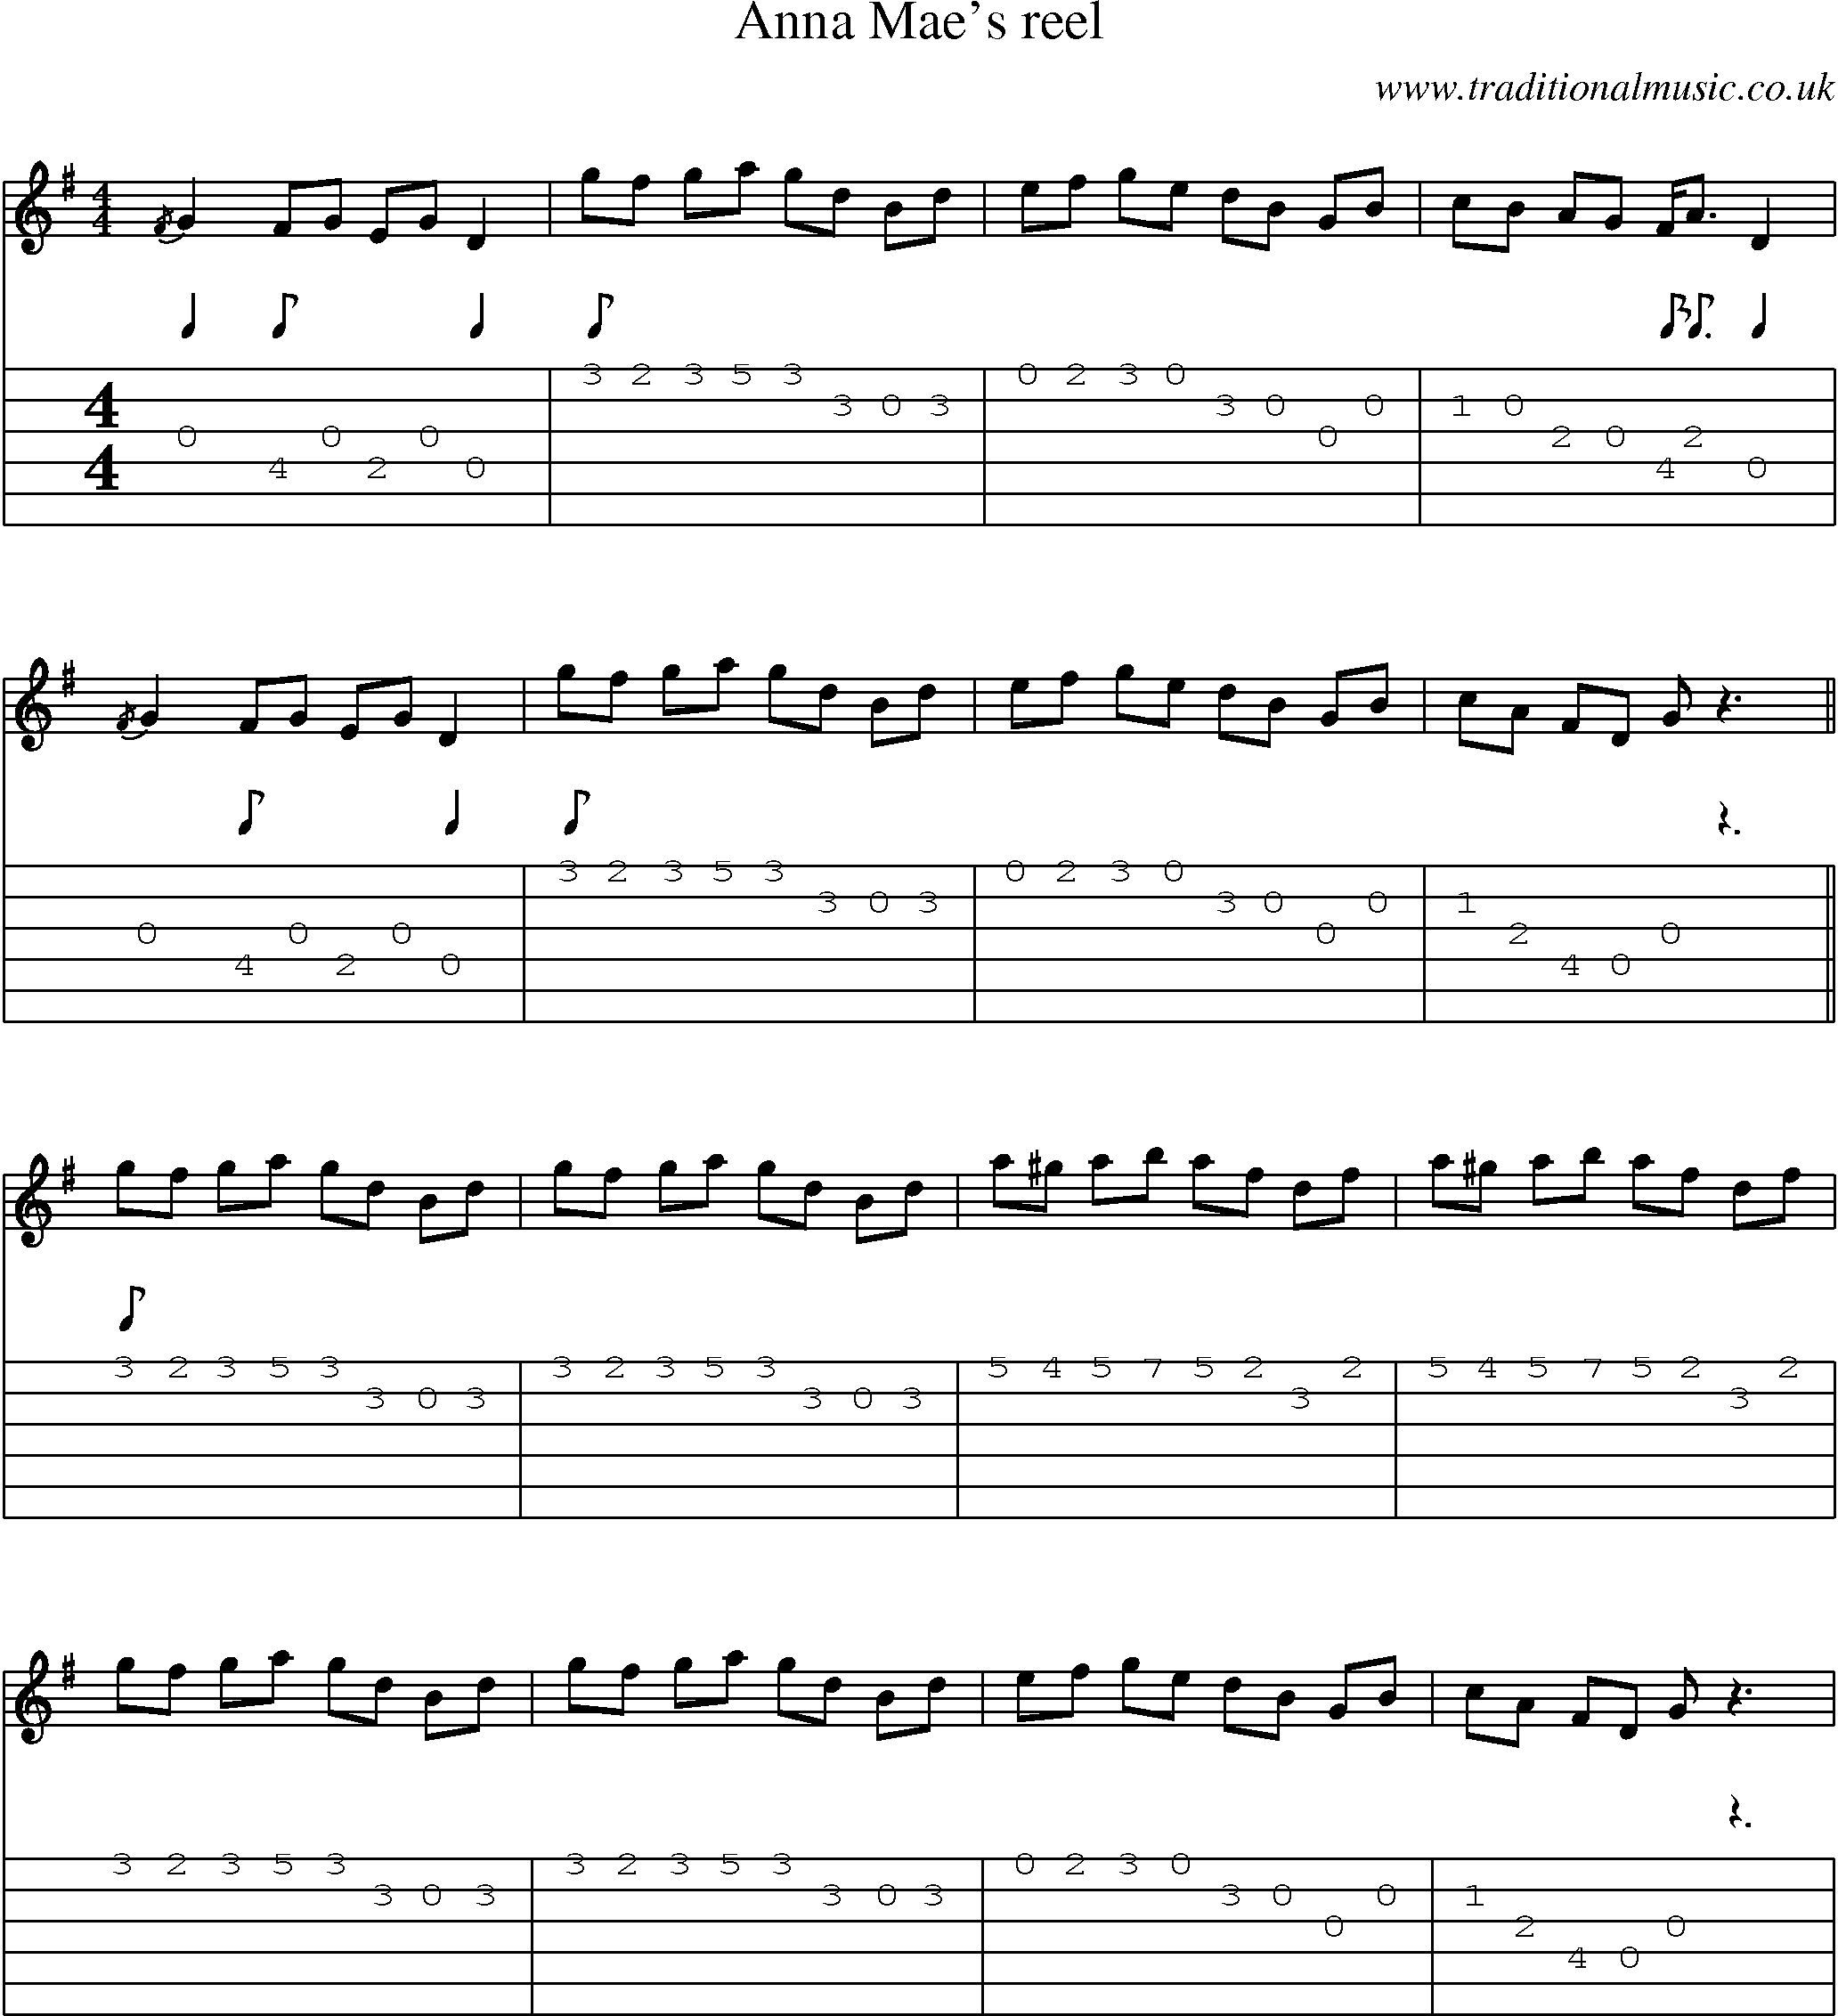 Music Score and Guitar Tabs for Anna Maes Reel